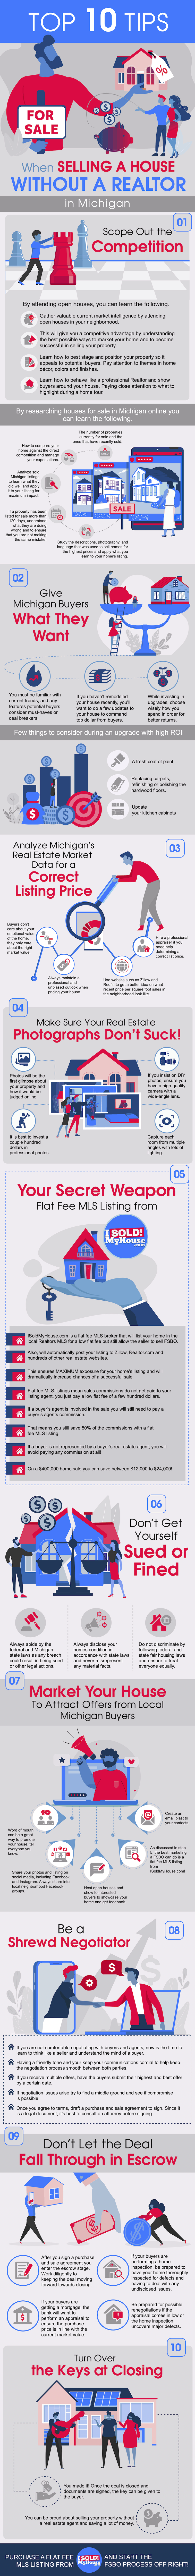 infographic of the 10 steps to sell a house in michigan without an agent